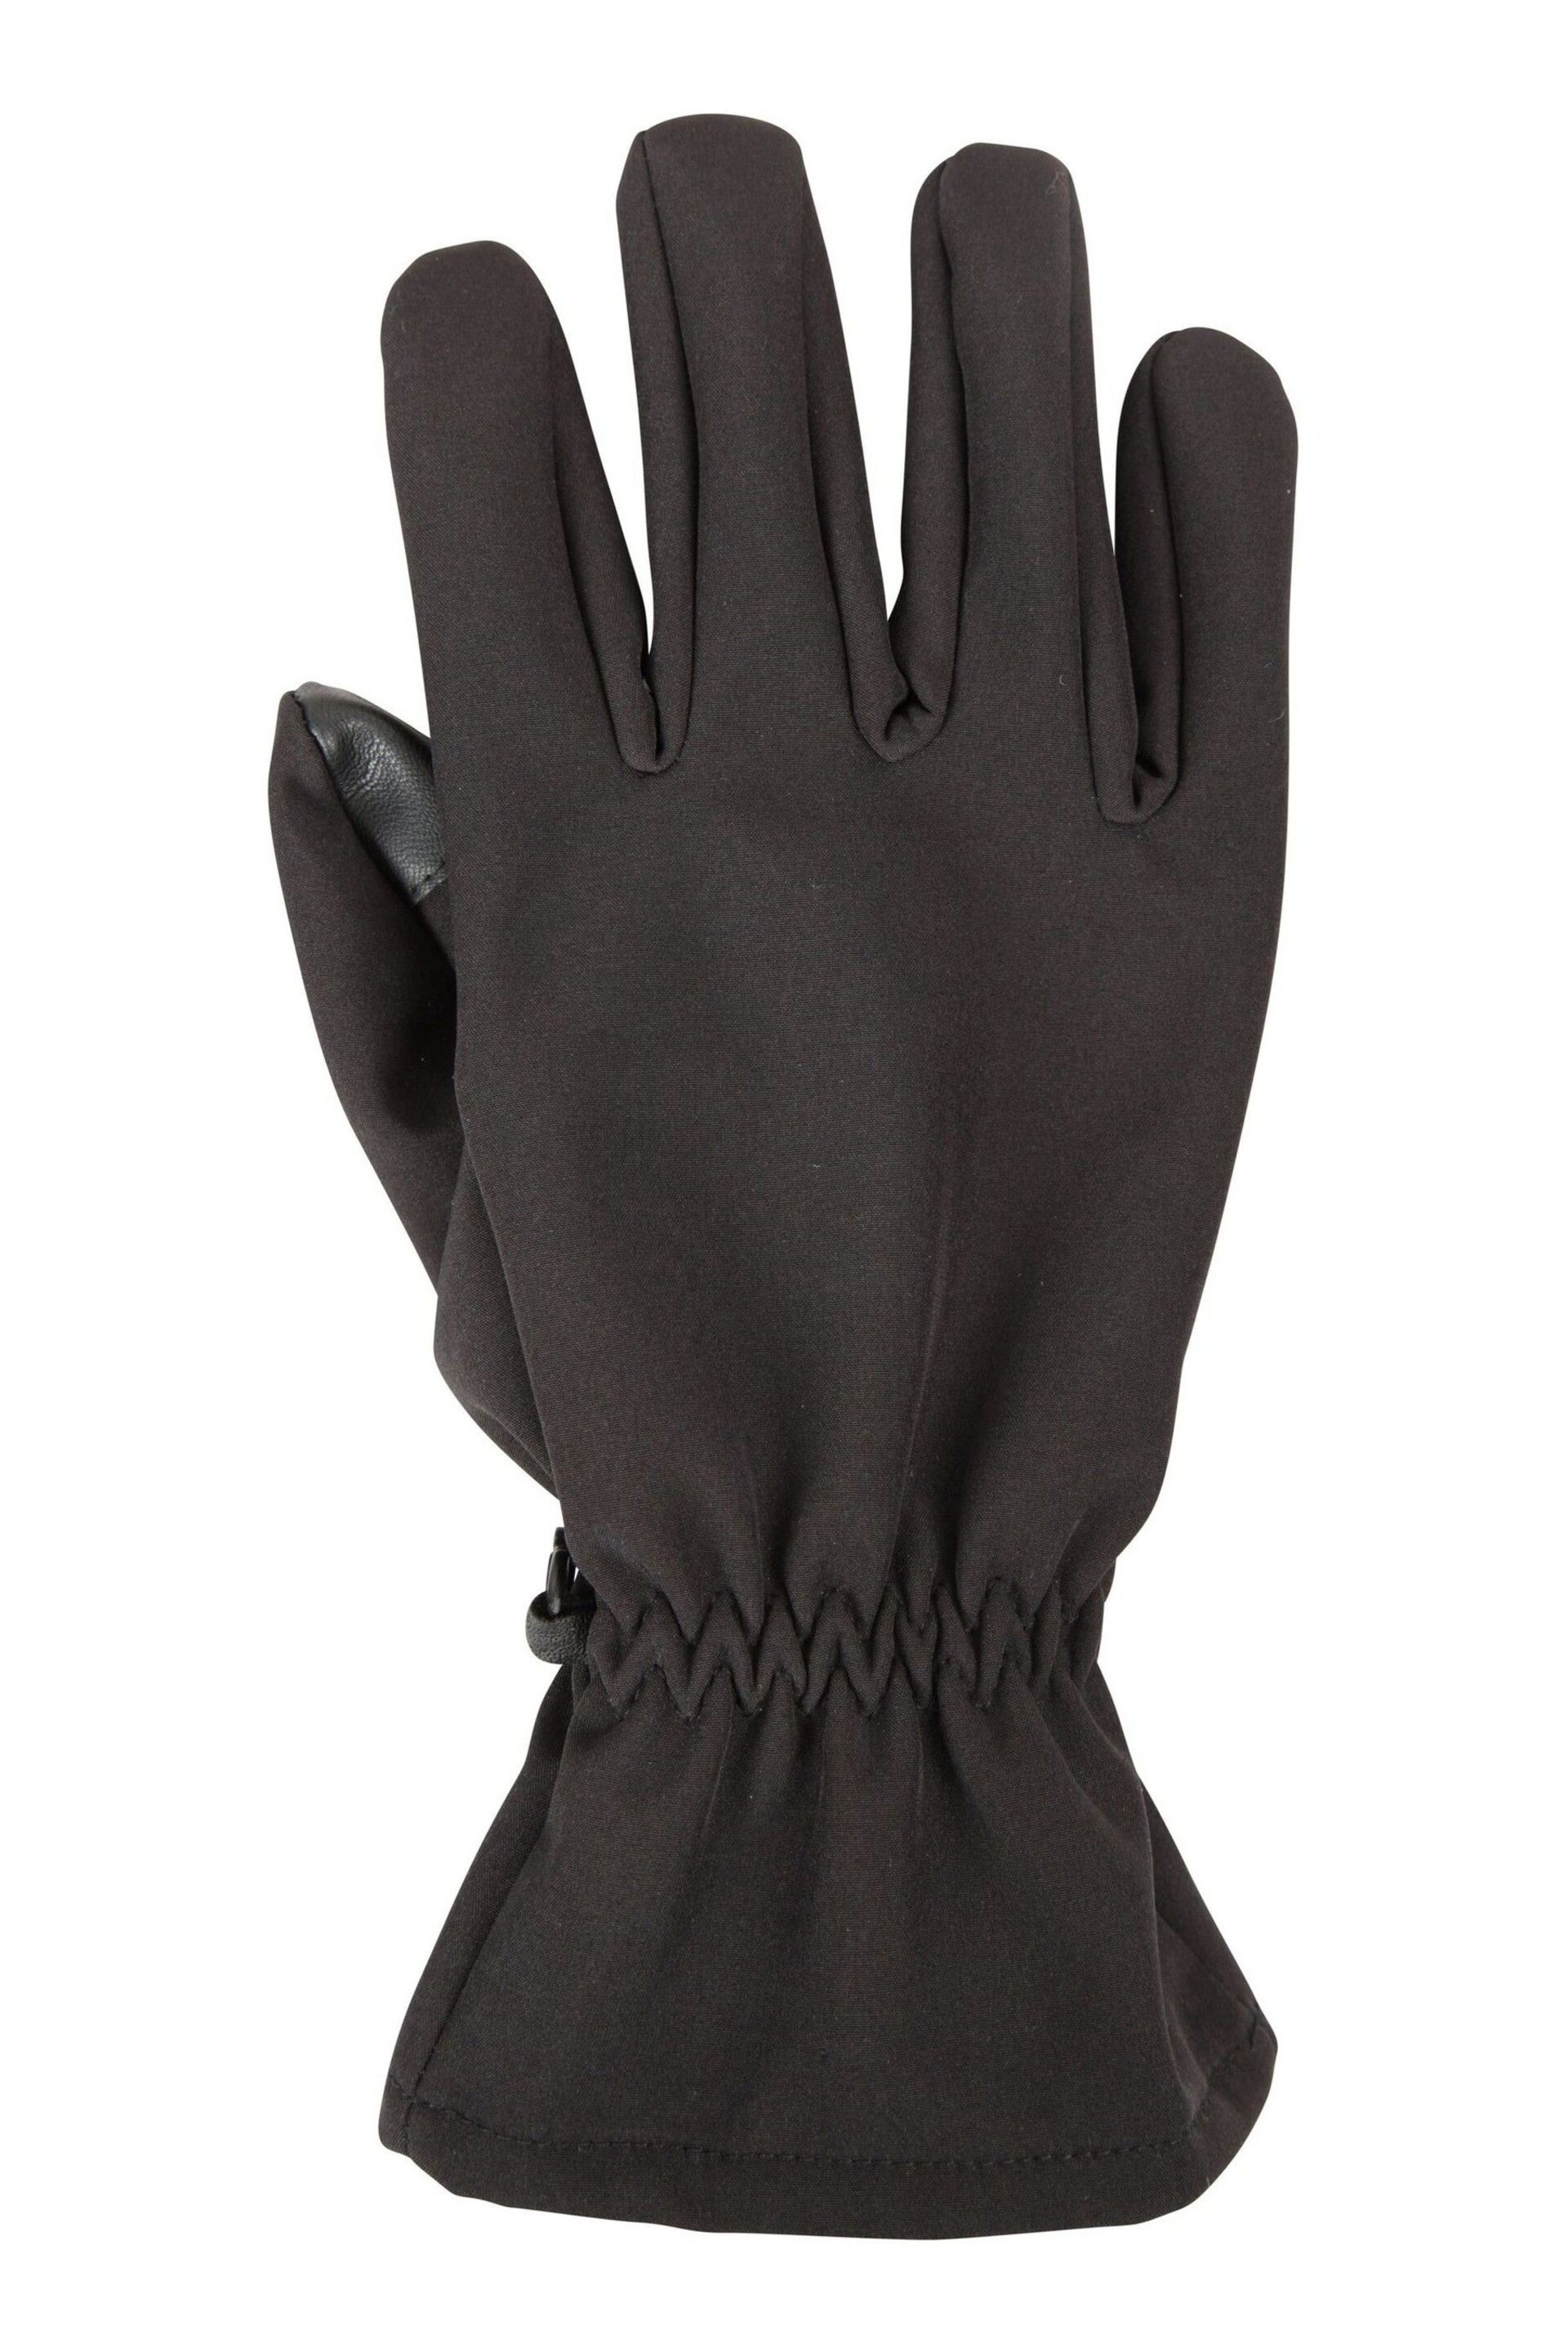 Mountain Warehouse Black Water Repellent Wind Resistant Mens Gloves - Image 2 of 5